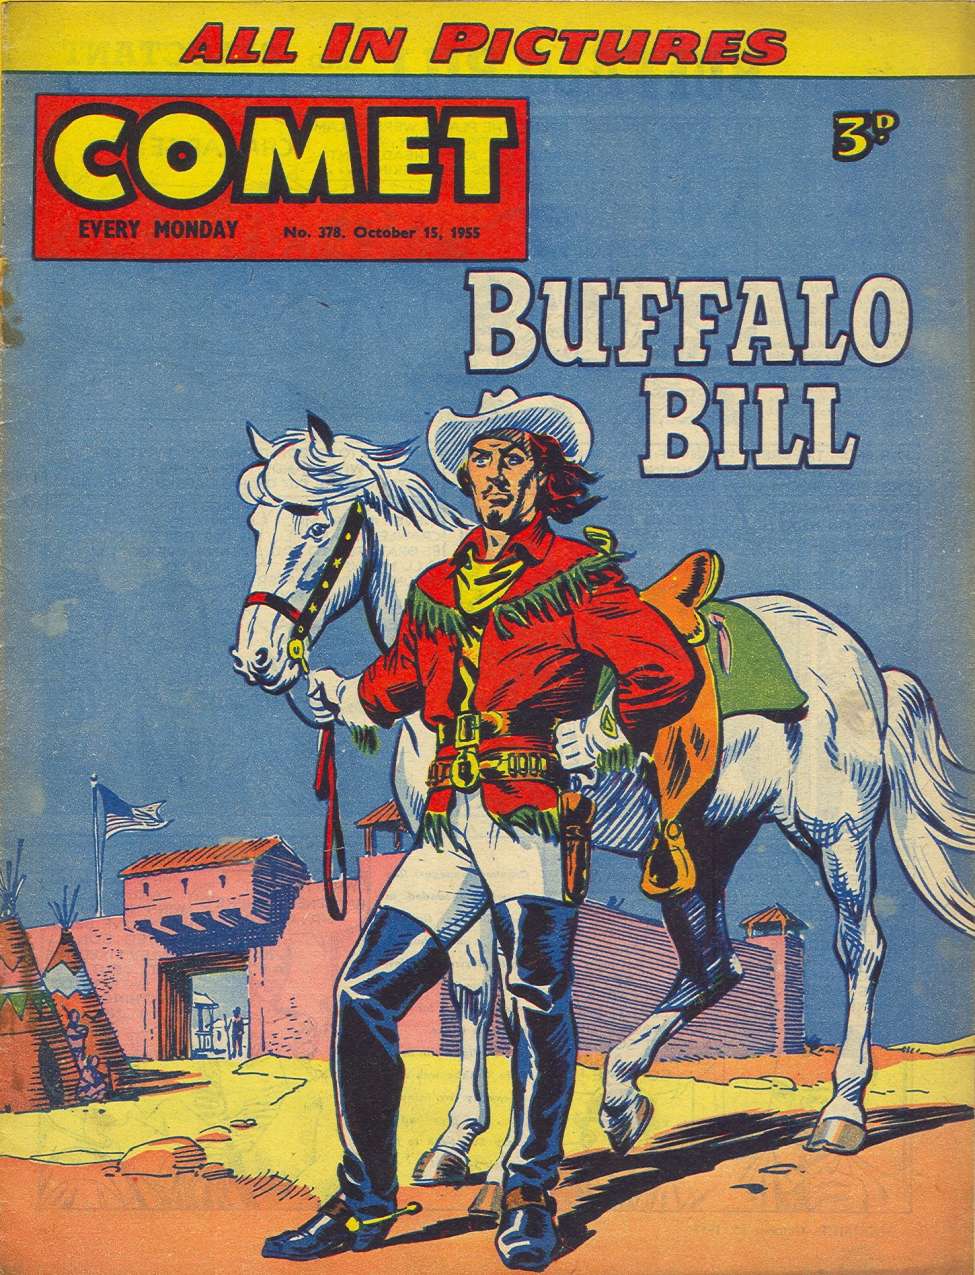 Book Cover For The Comet 378